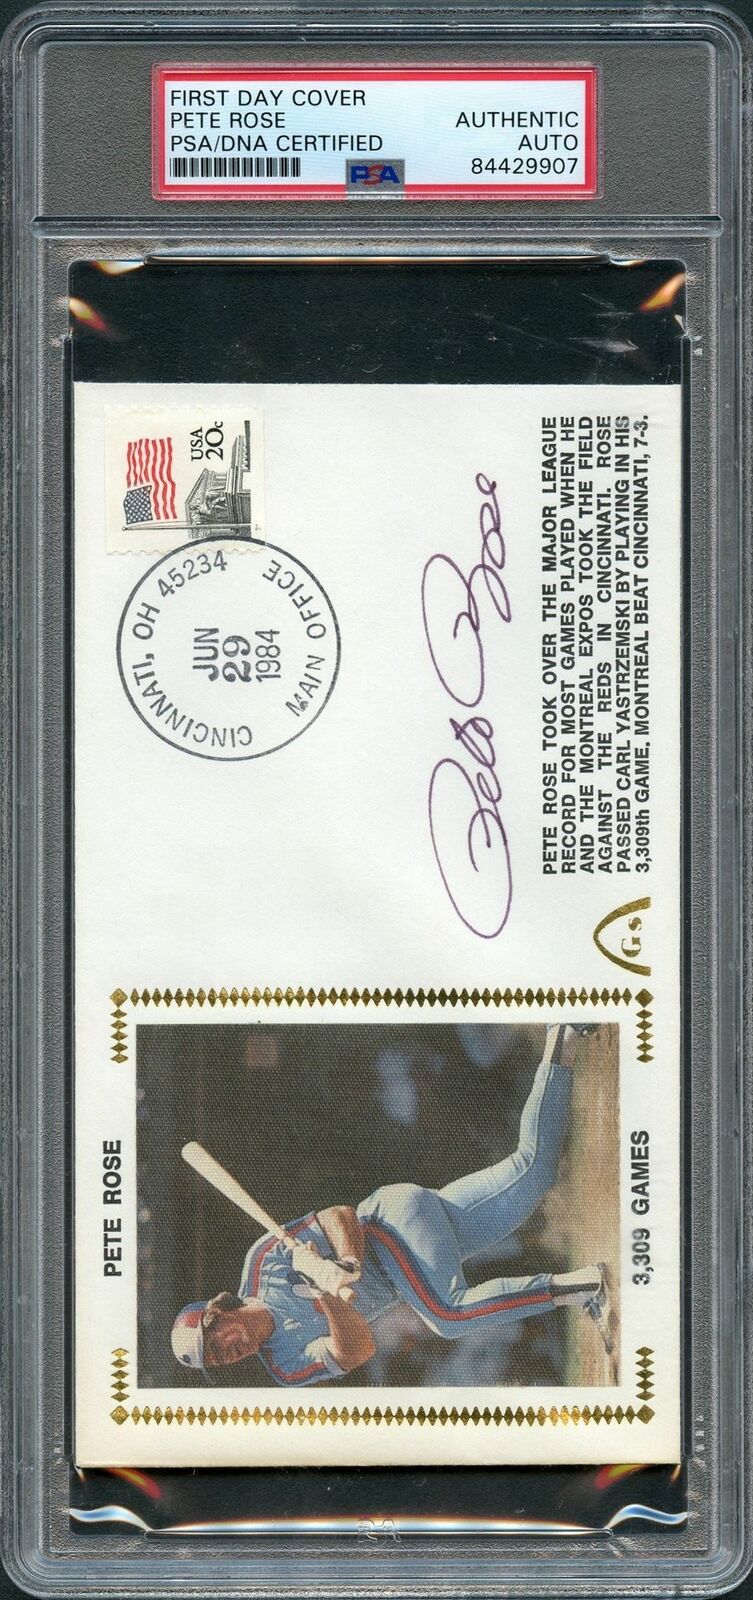 PETE ROSE SIGNED 1984 FIRST DAY COVER PSA/DNA MONTREAL EXPOS AUTOGRAPHED SLABBED COLLECTIBLE MEMORABILIA